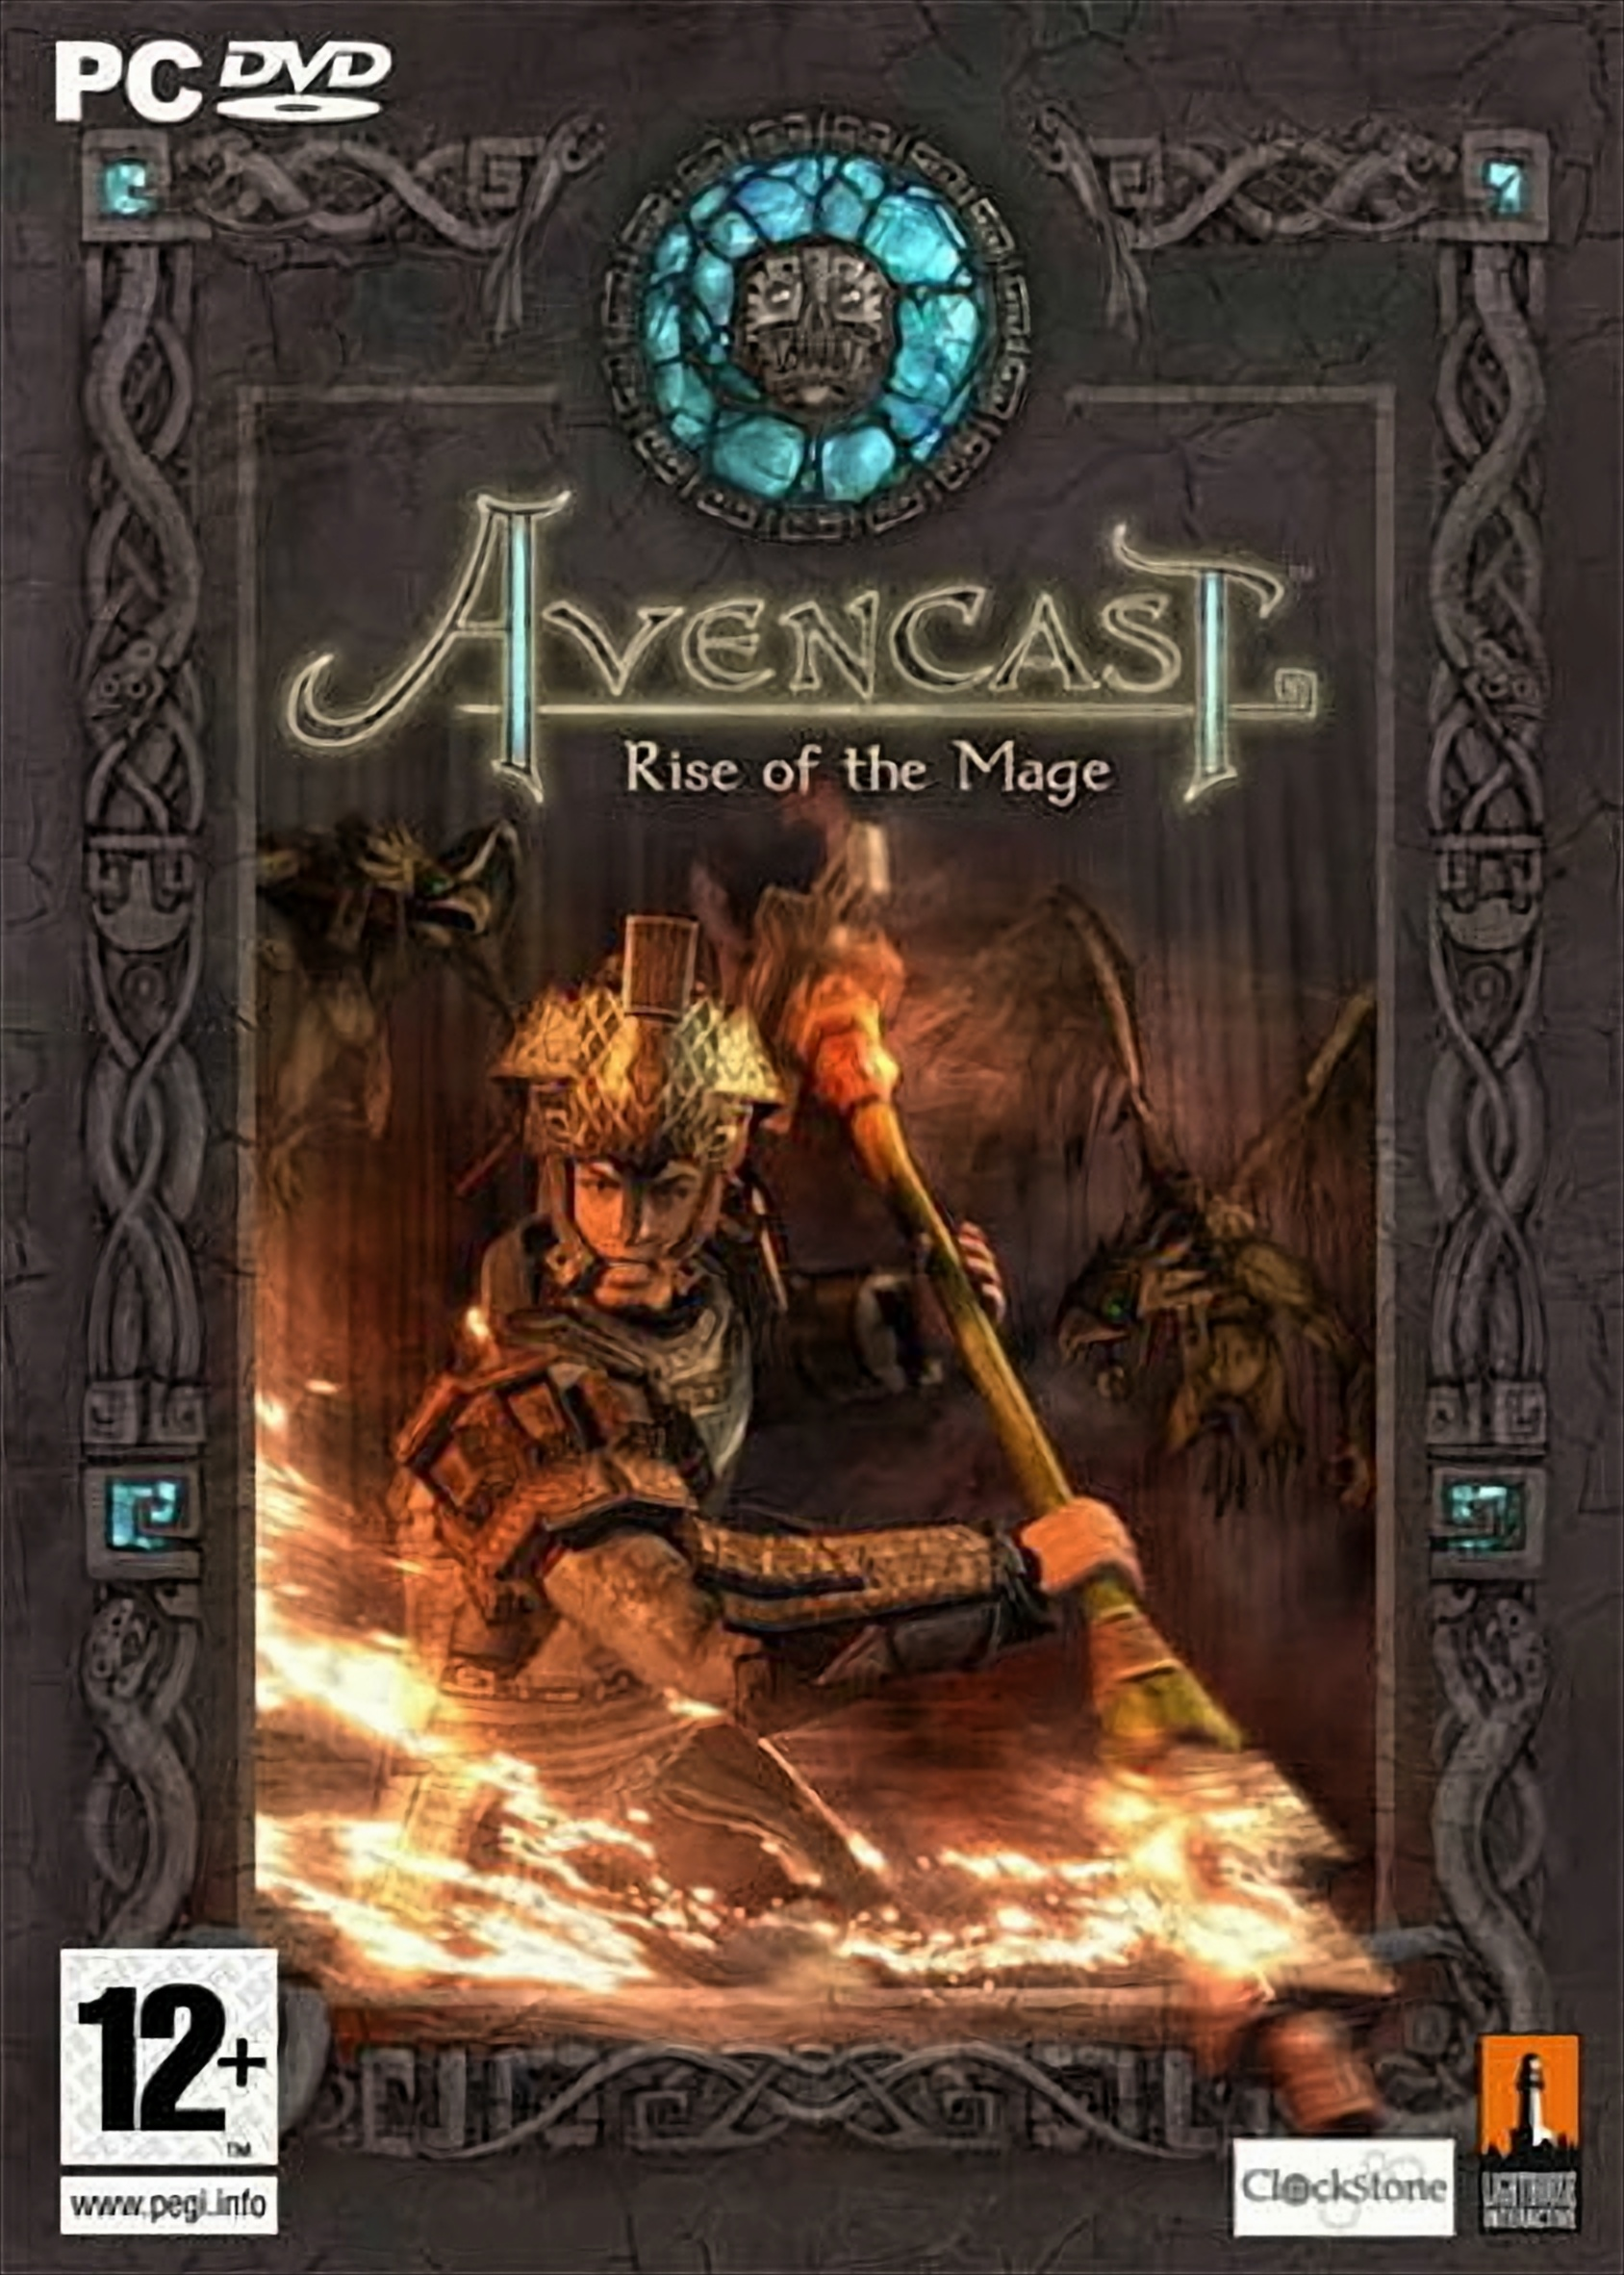 Of Avencast The - Mage Rise - [PC]